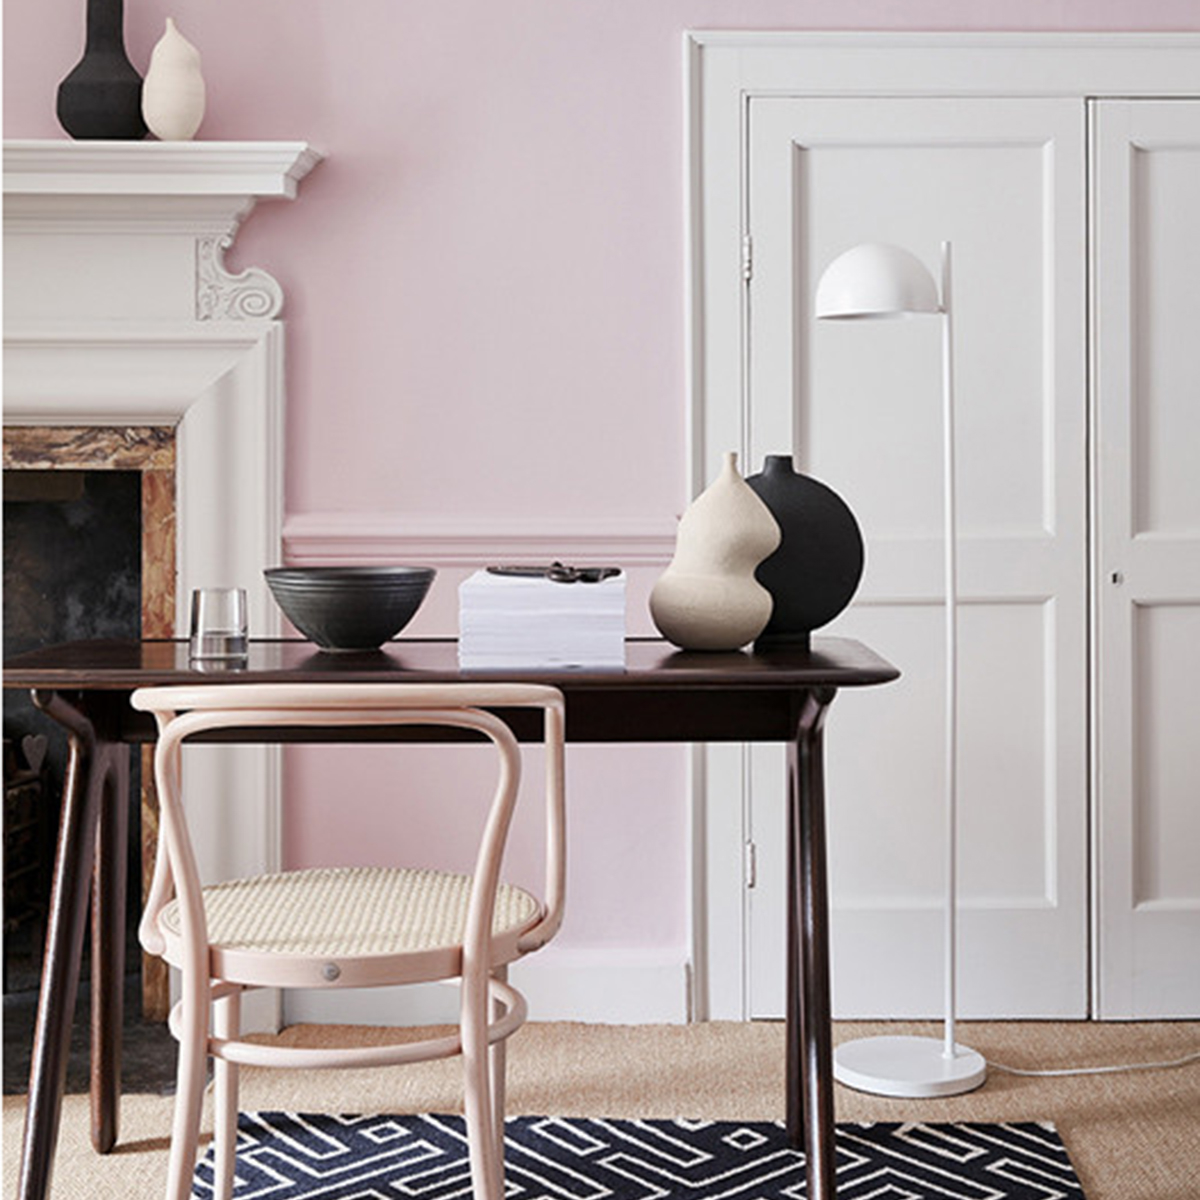 Pale pink walls, white floor lamp, black desk, pale wood chair and monochrome geometric rug. Image by Little Greene